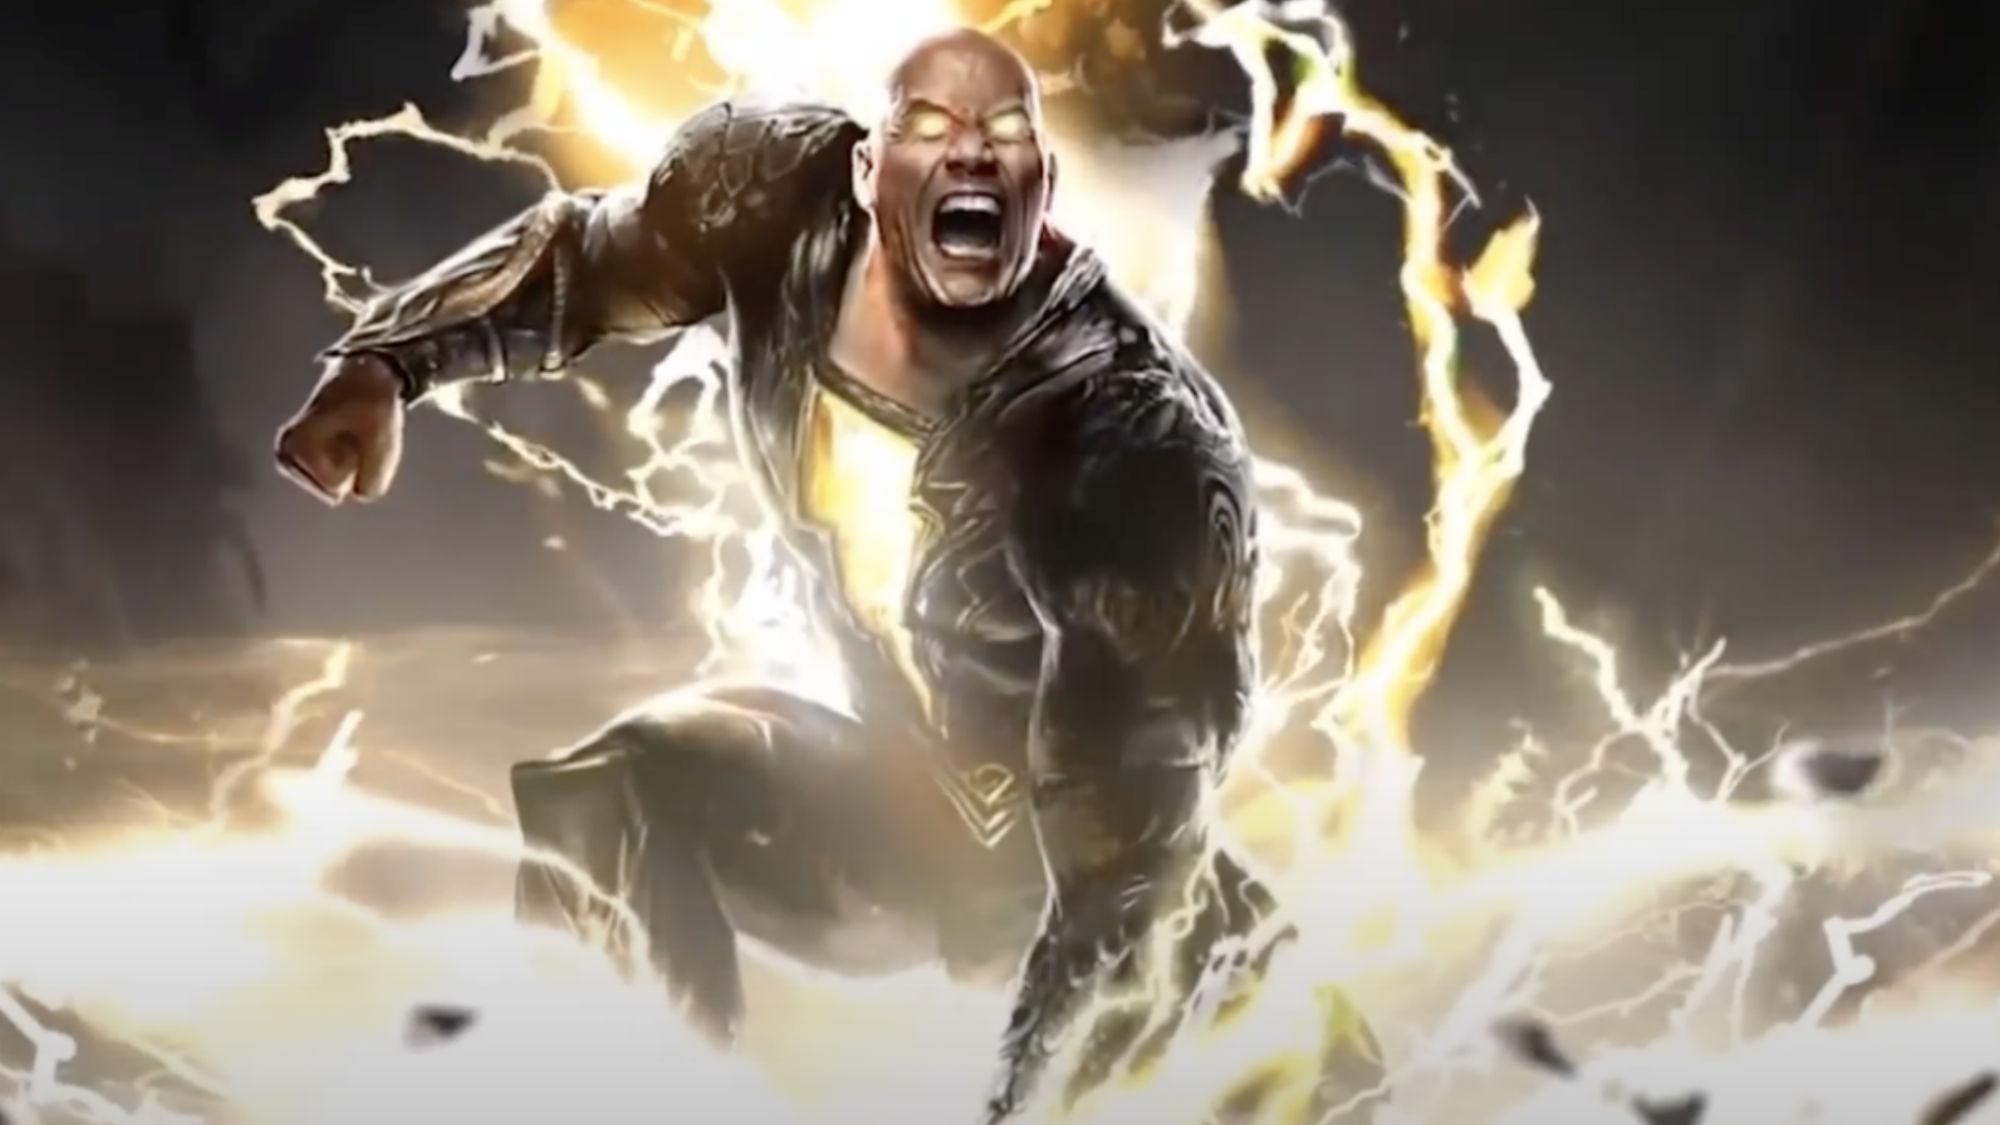 What is Black Adam about? Exploring the powers of Dwayne Johnson's